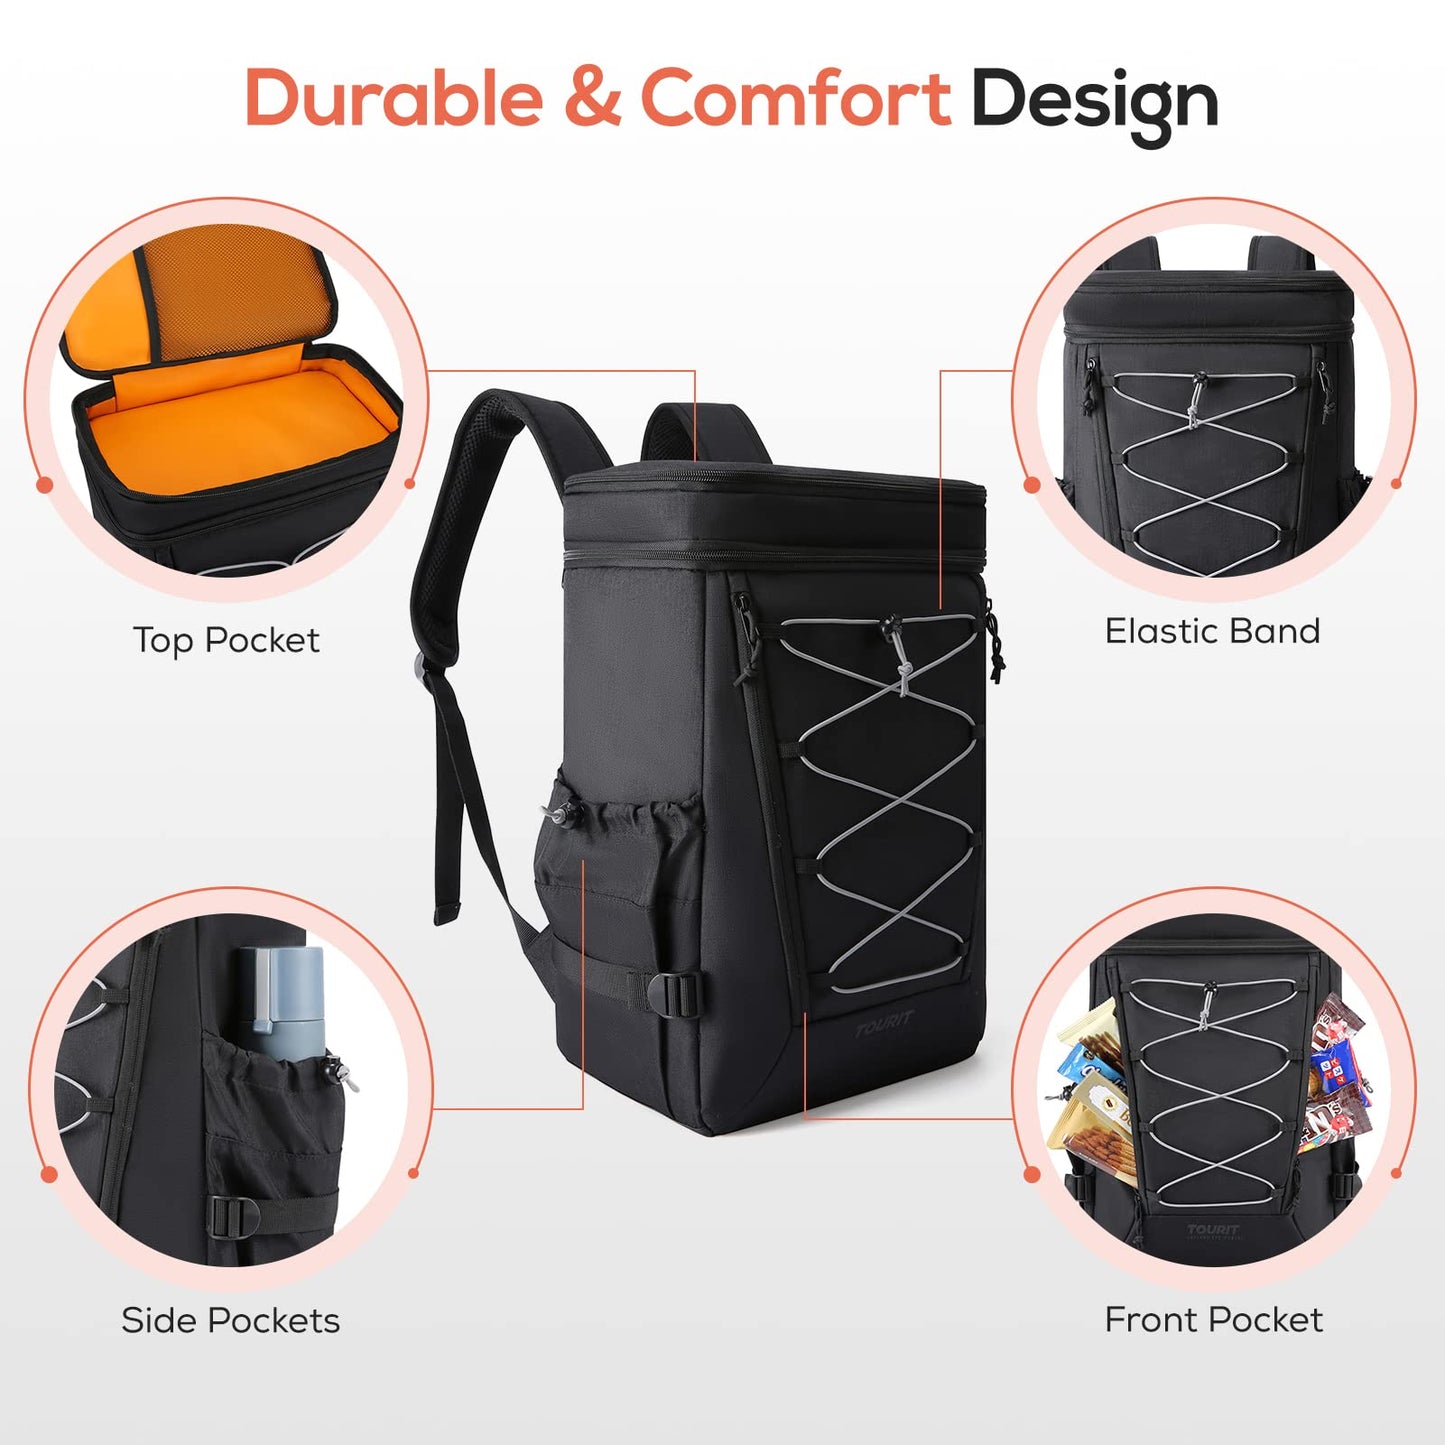 TOURIT Backpack Cooler Leakproof Insulated Cooler Backpack Large Capacity Lightweight Soft Cooler Bag for Men Women to Picnics, Camping, Hiking, Beach, Park or Day Trips